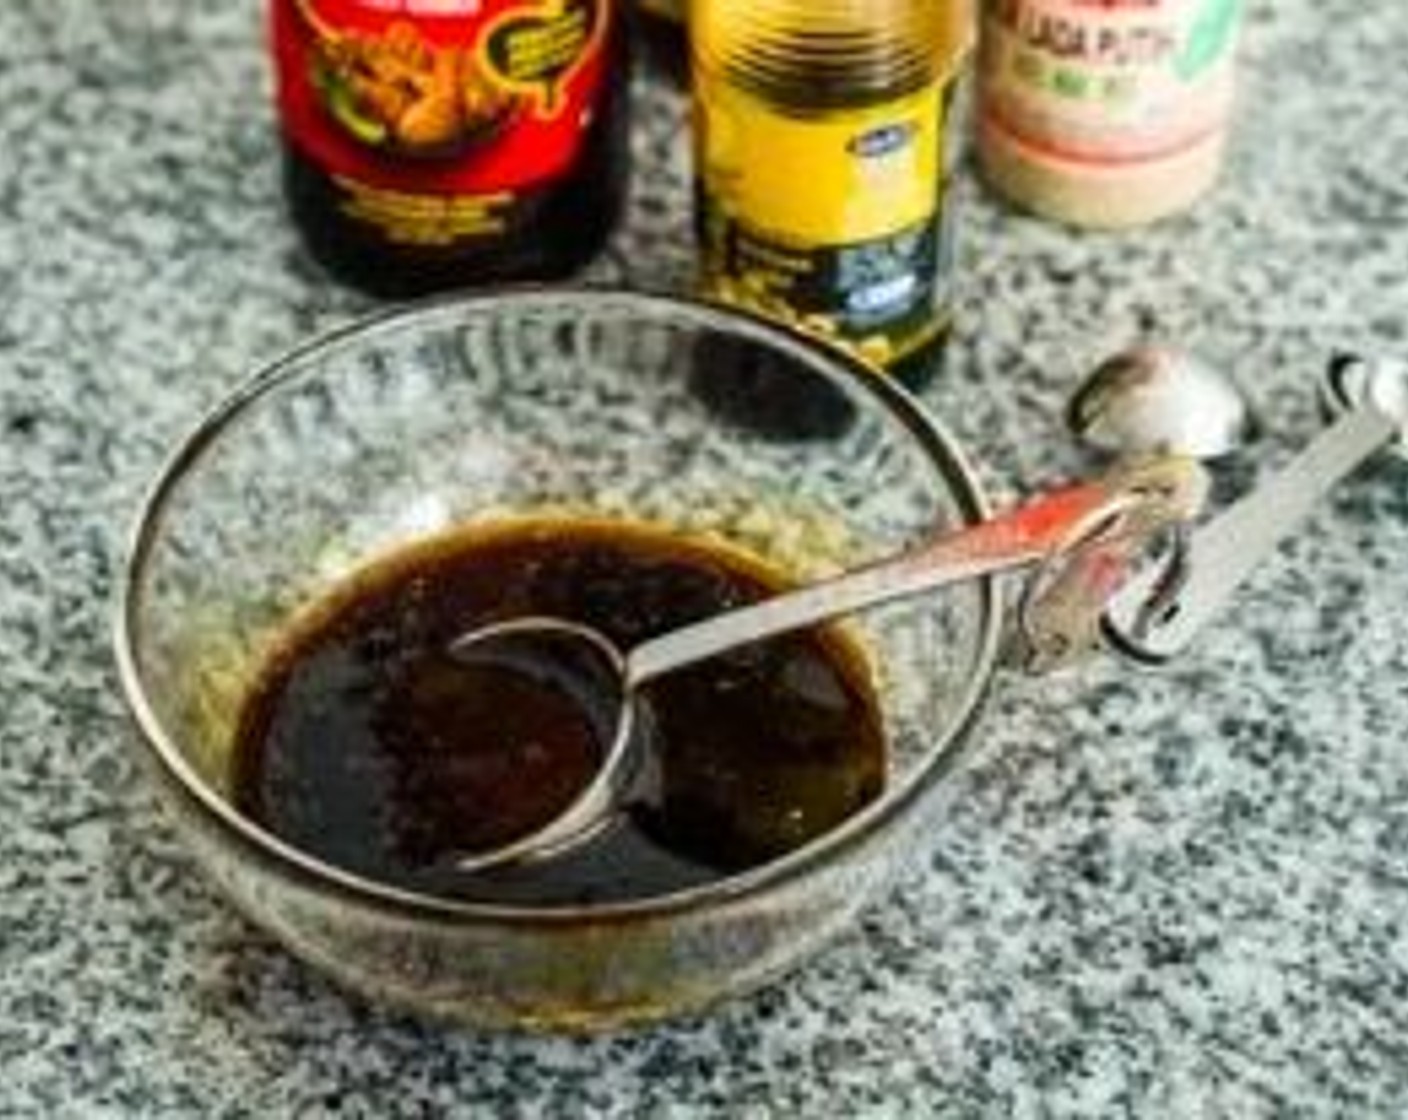 step 1 In a mixing bowl, combine the Sweet Soy Sauce (1/4 cup), Soy Sauce (1 Tbsp), Oyster Sauce (1/2 Tbsp), and Ground White Pepper (2 dashes).